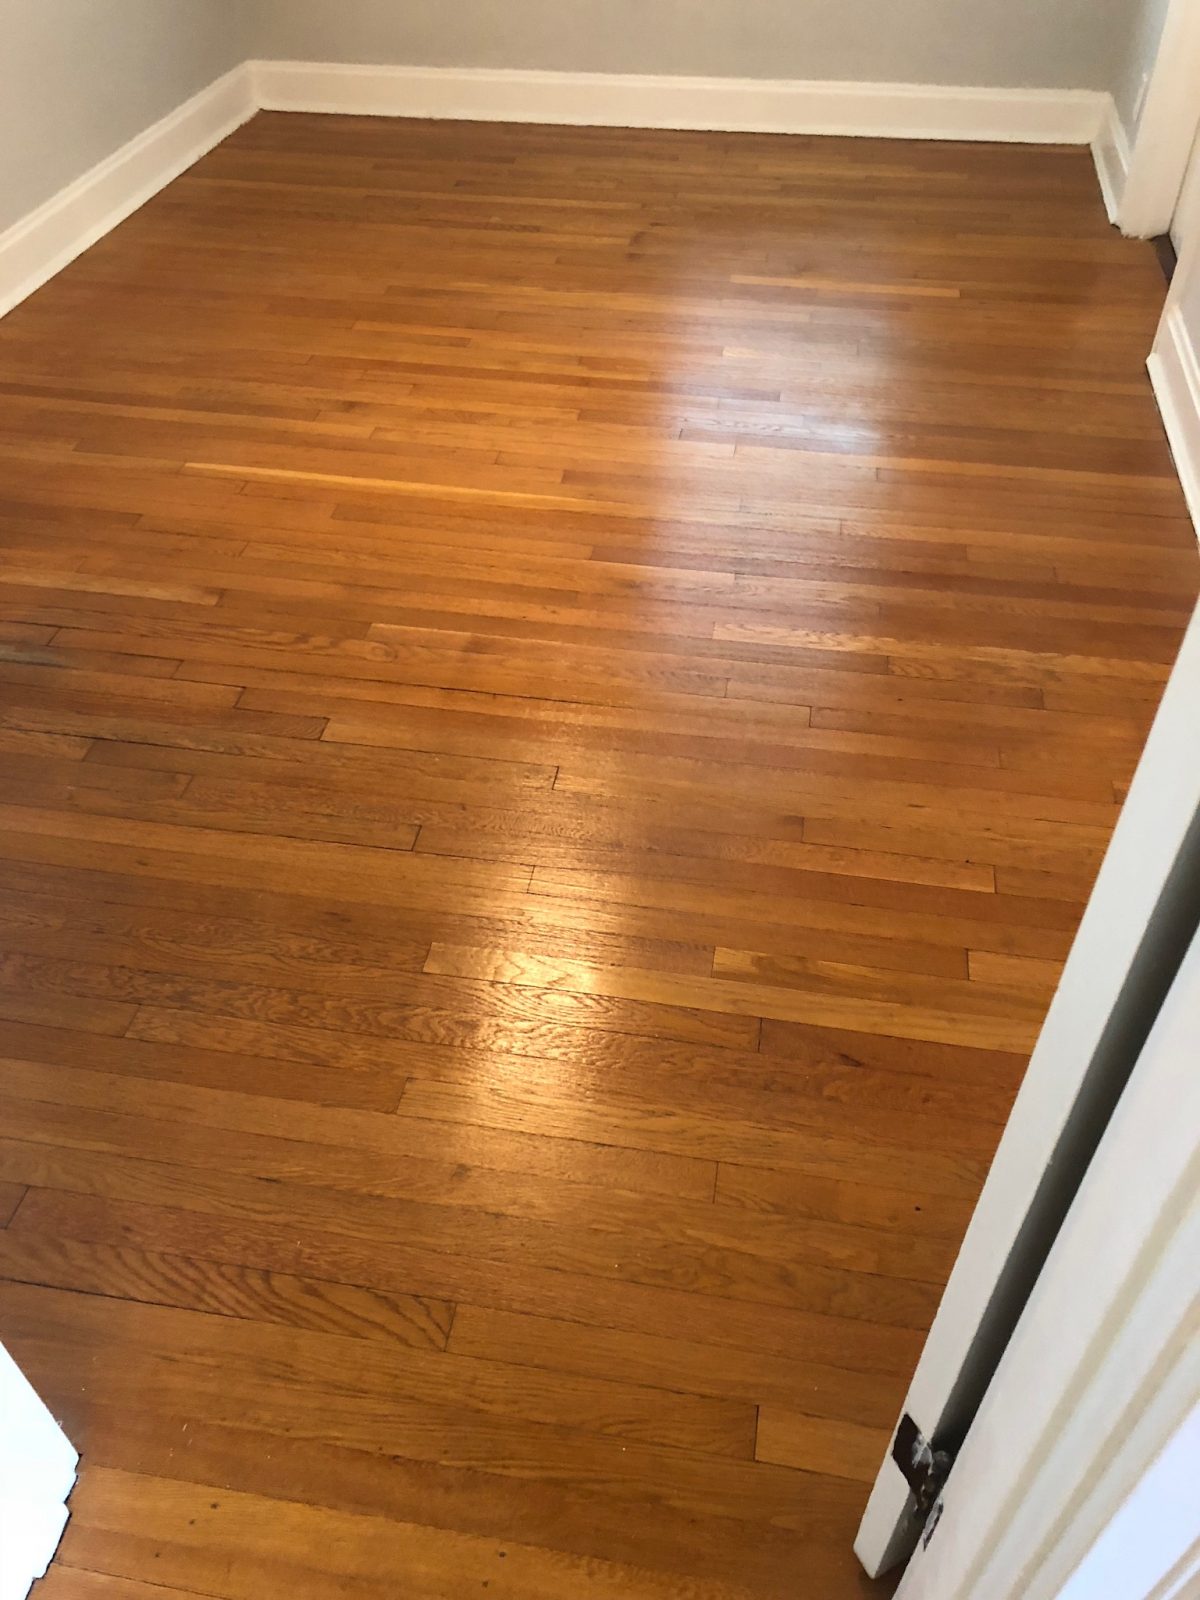 Professional Hardwood Floor Cleaning Loveland Ohio by Howards Cleaning Service